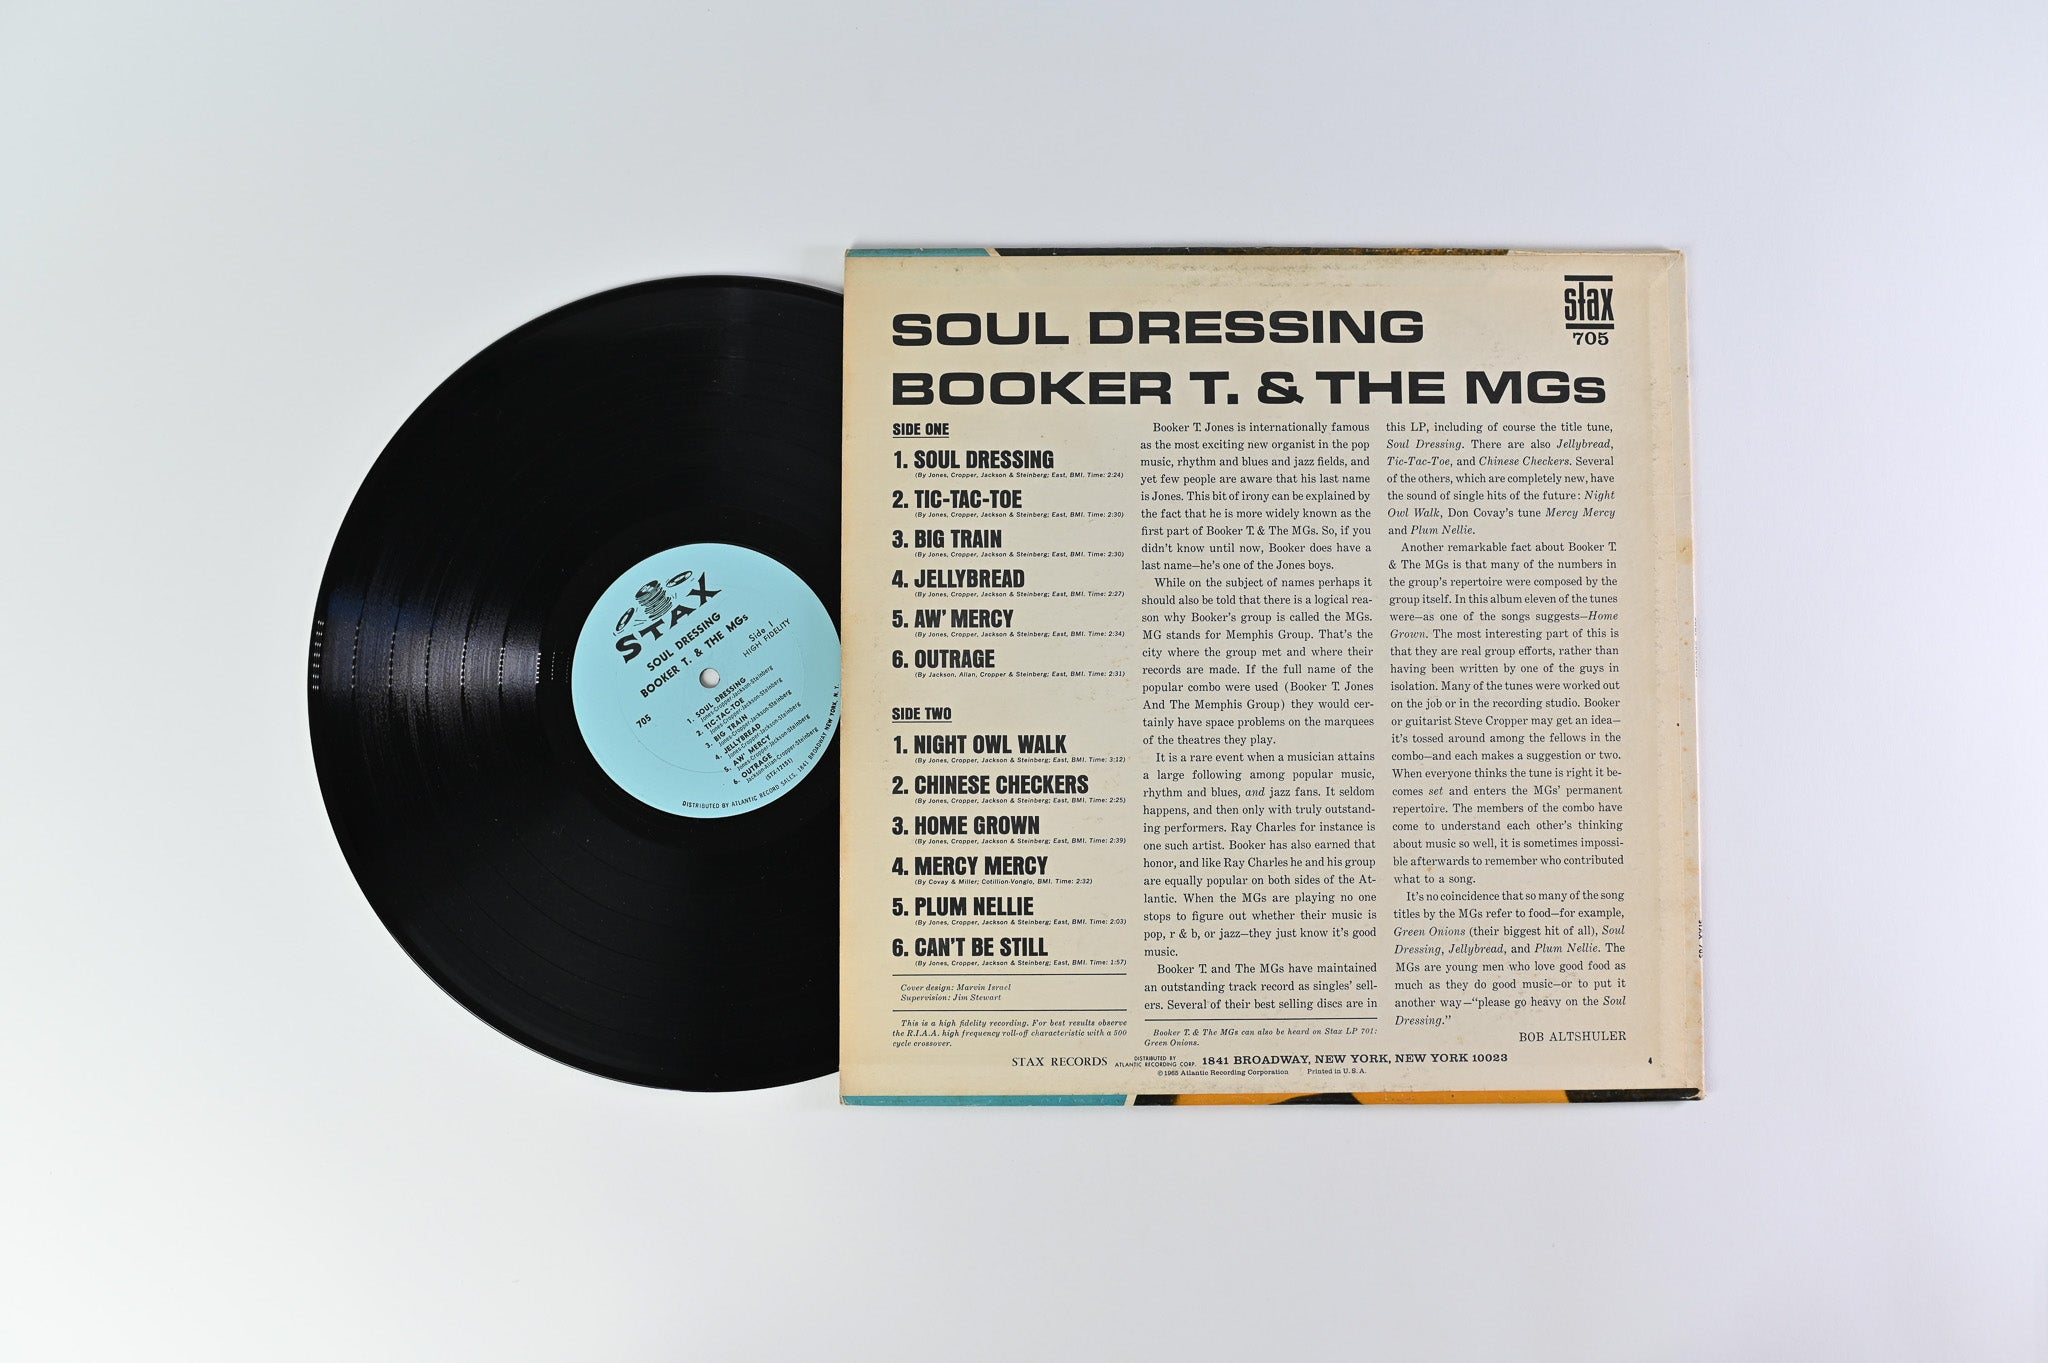 Booker T & The MG's - Soul Dressing on Stax